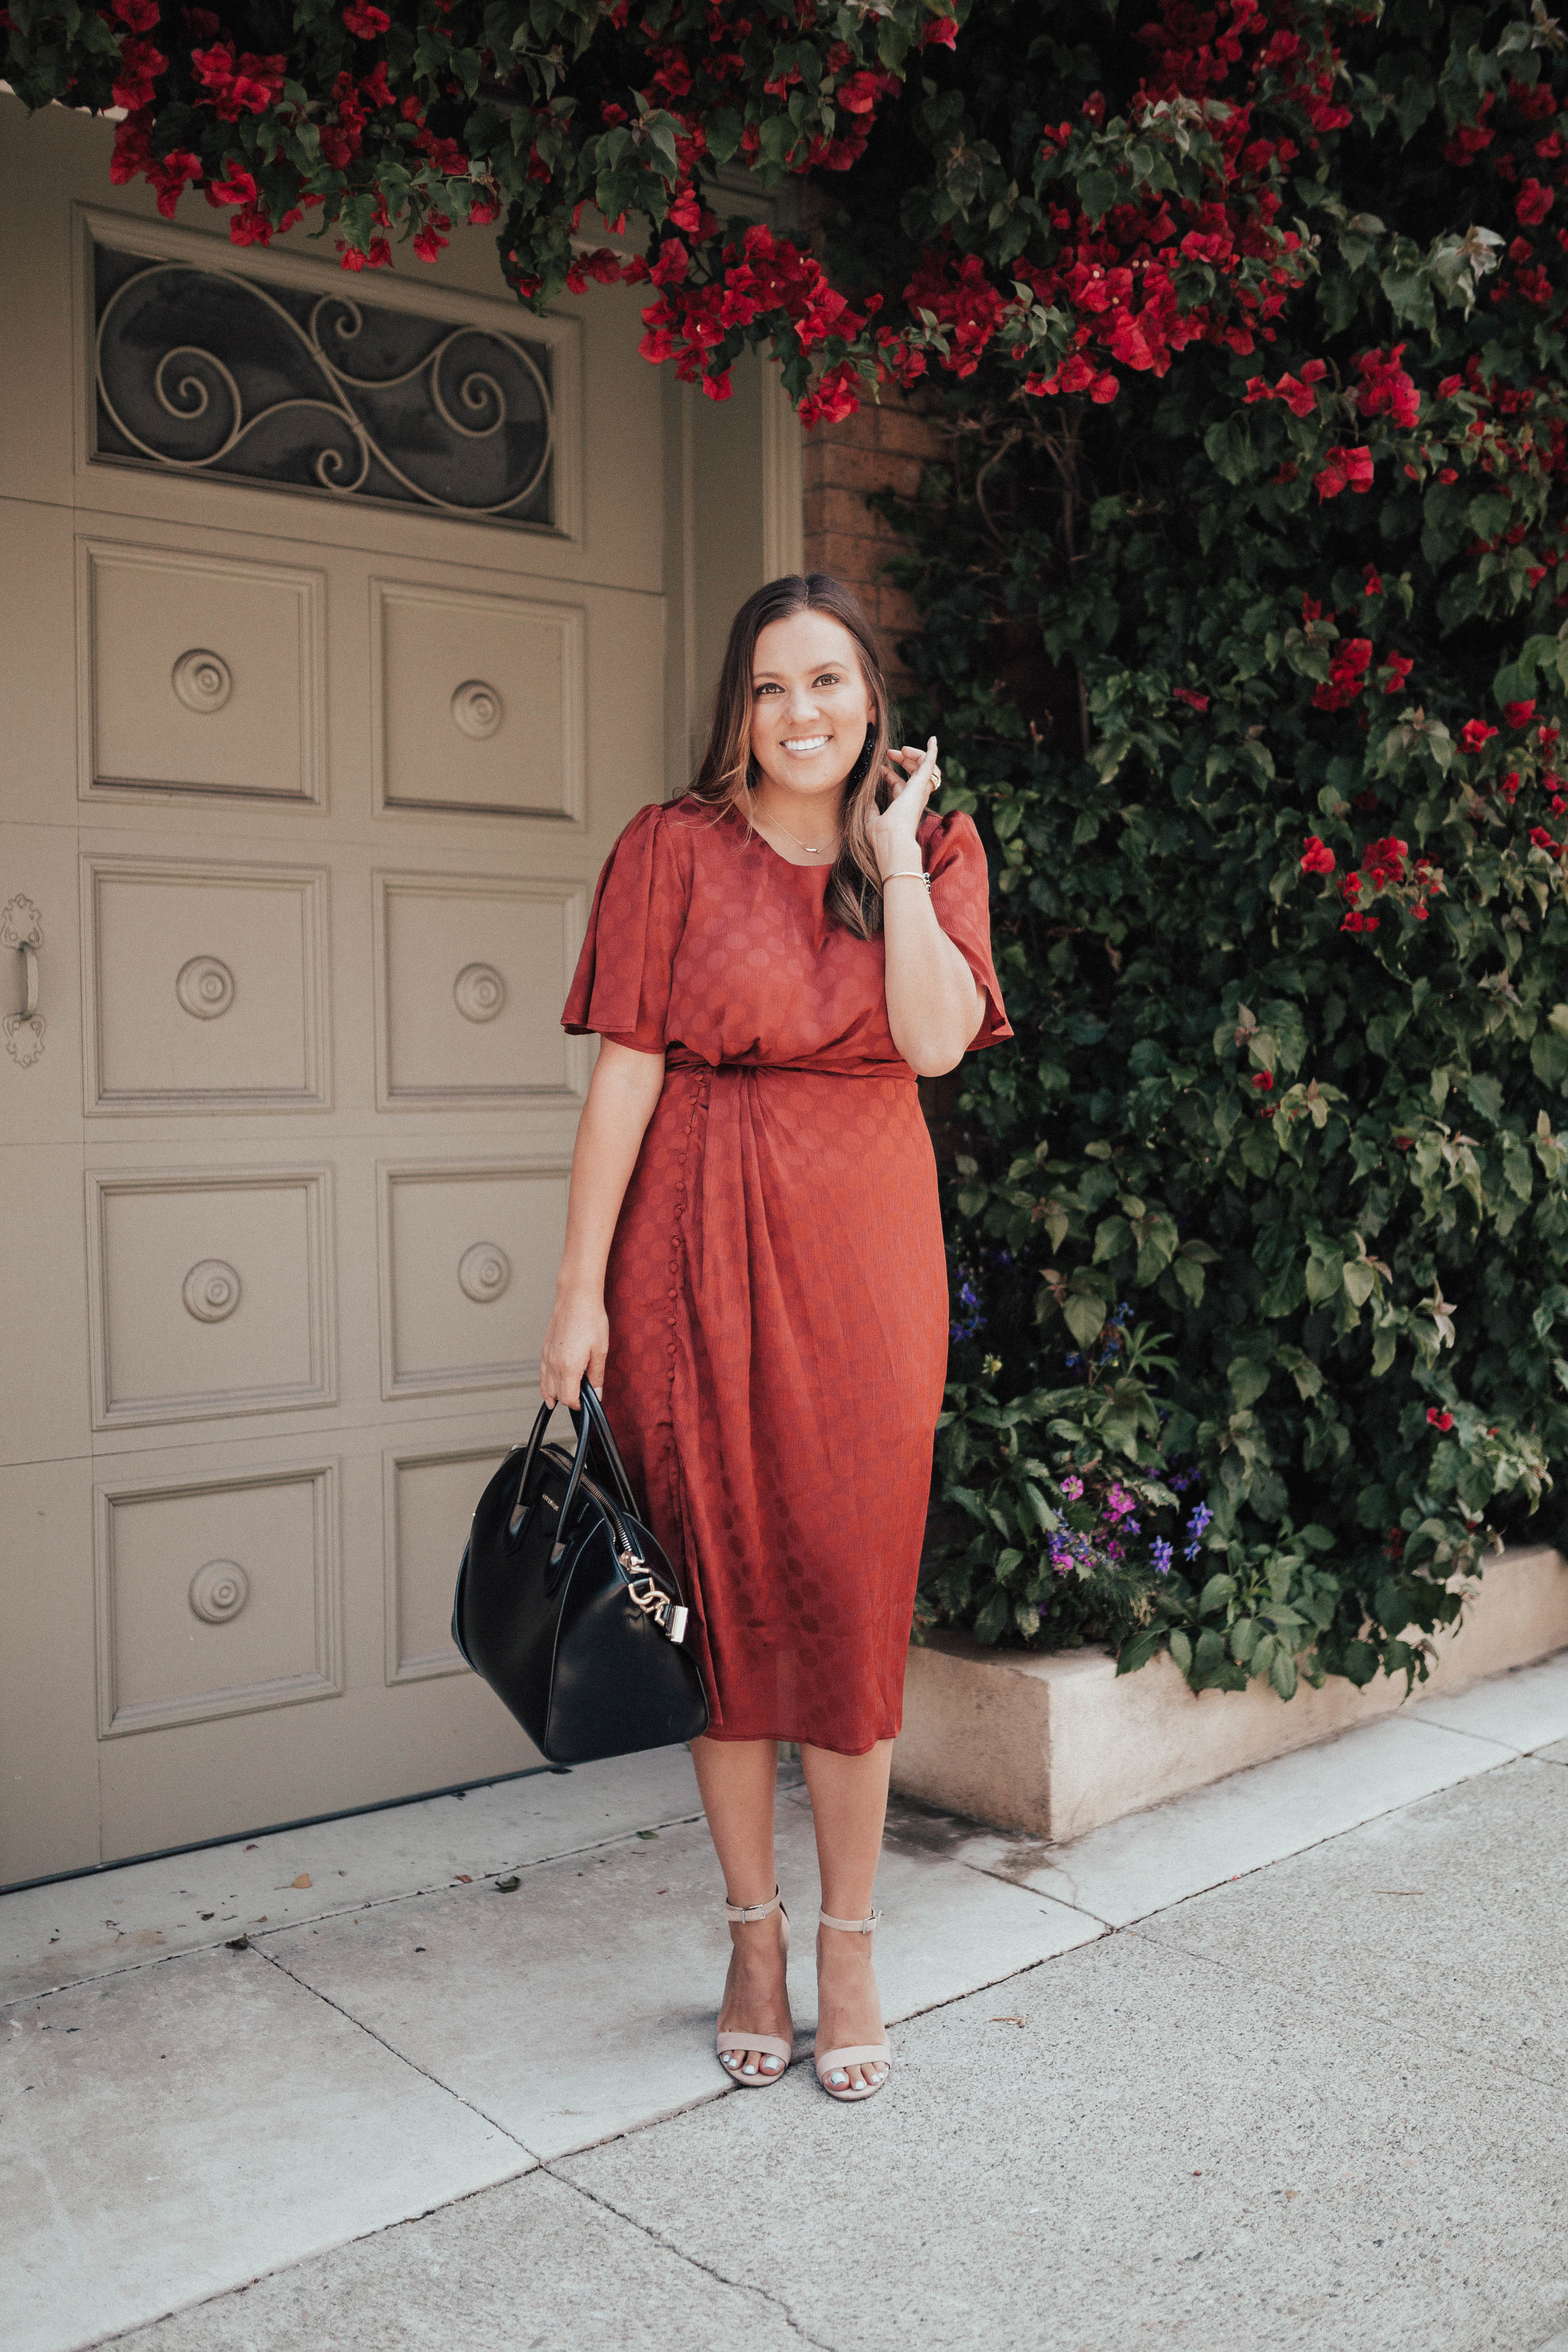 Ashley Zeal from Two Peas in a Prada shares the transitional pieces she's loving right now. All pieces are in a perfect fall color palette. 